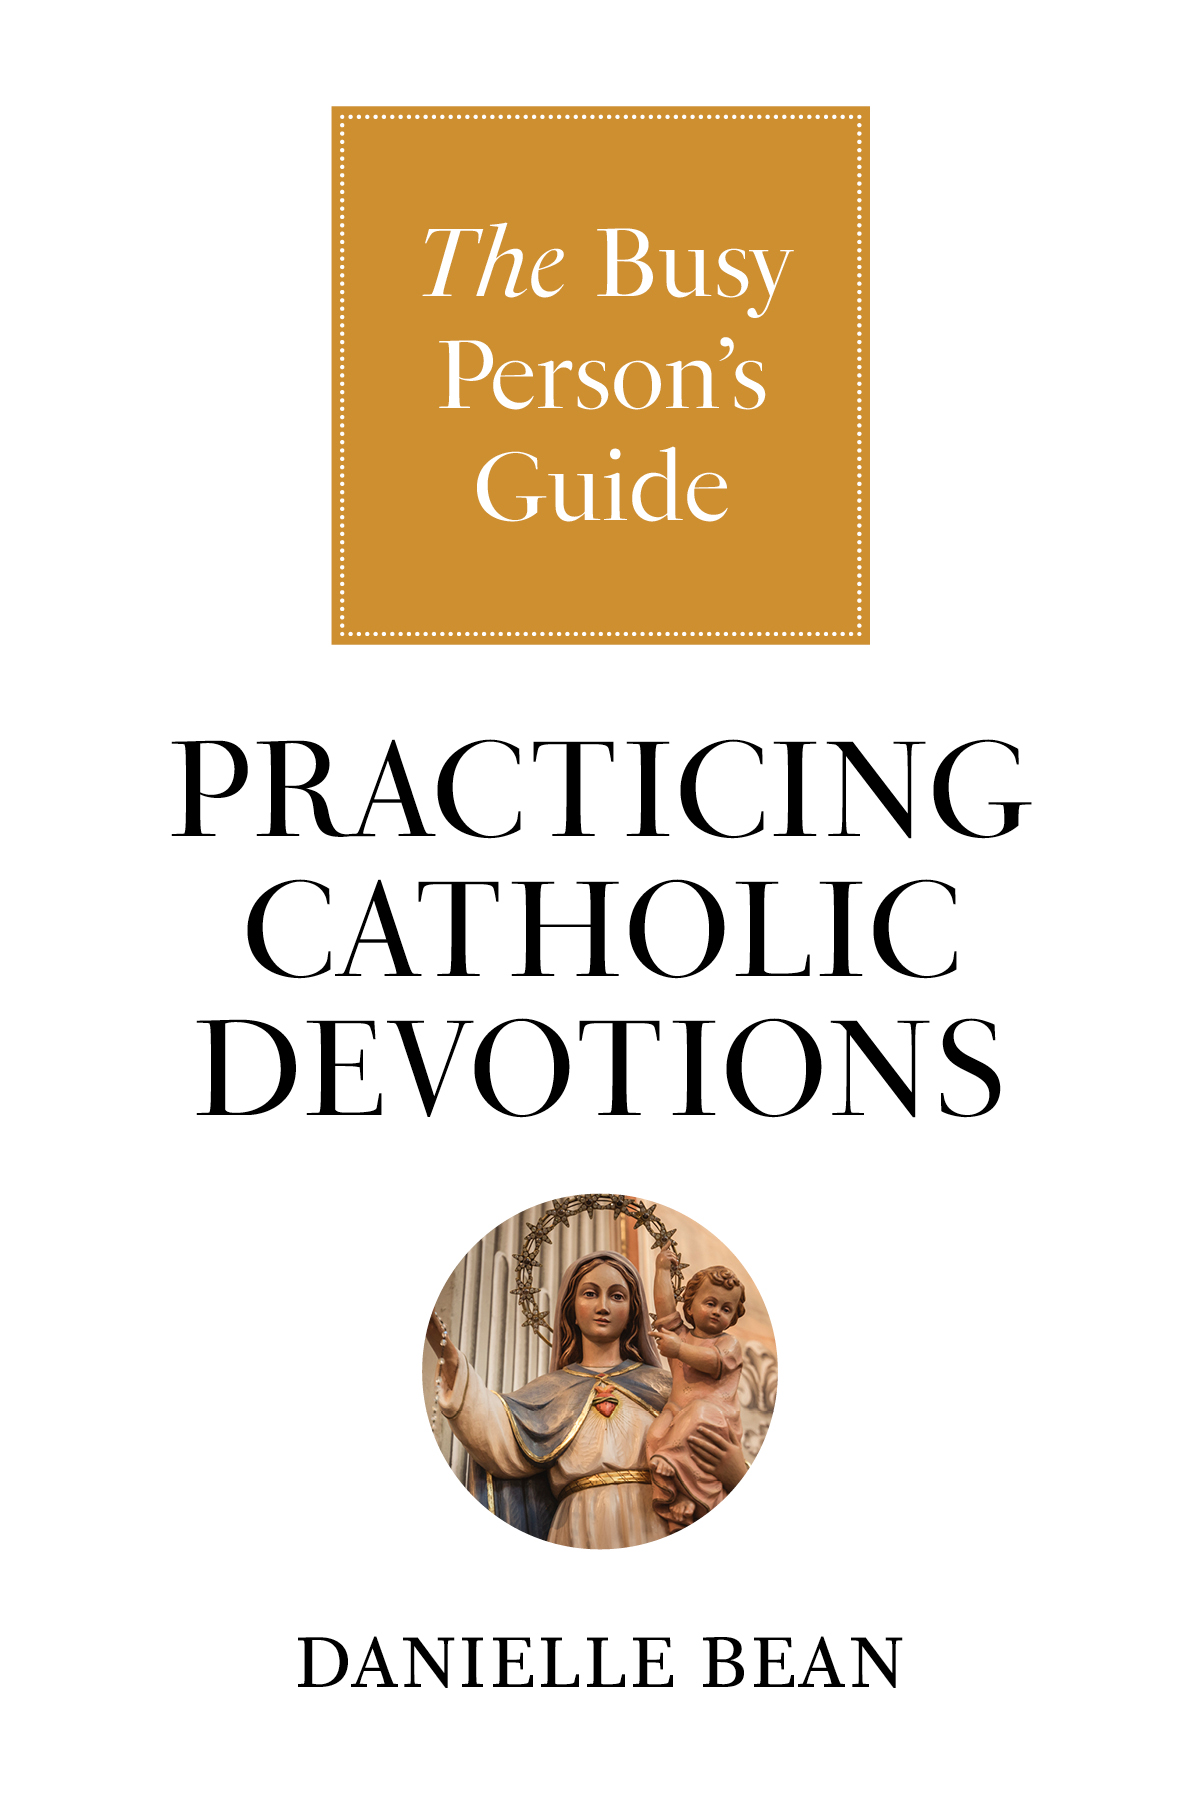 The Busy Person's Guide to Practicing Catholic Devotions